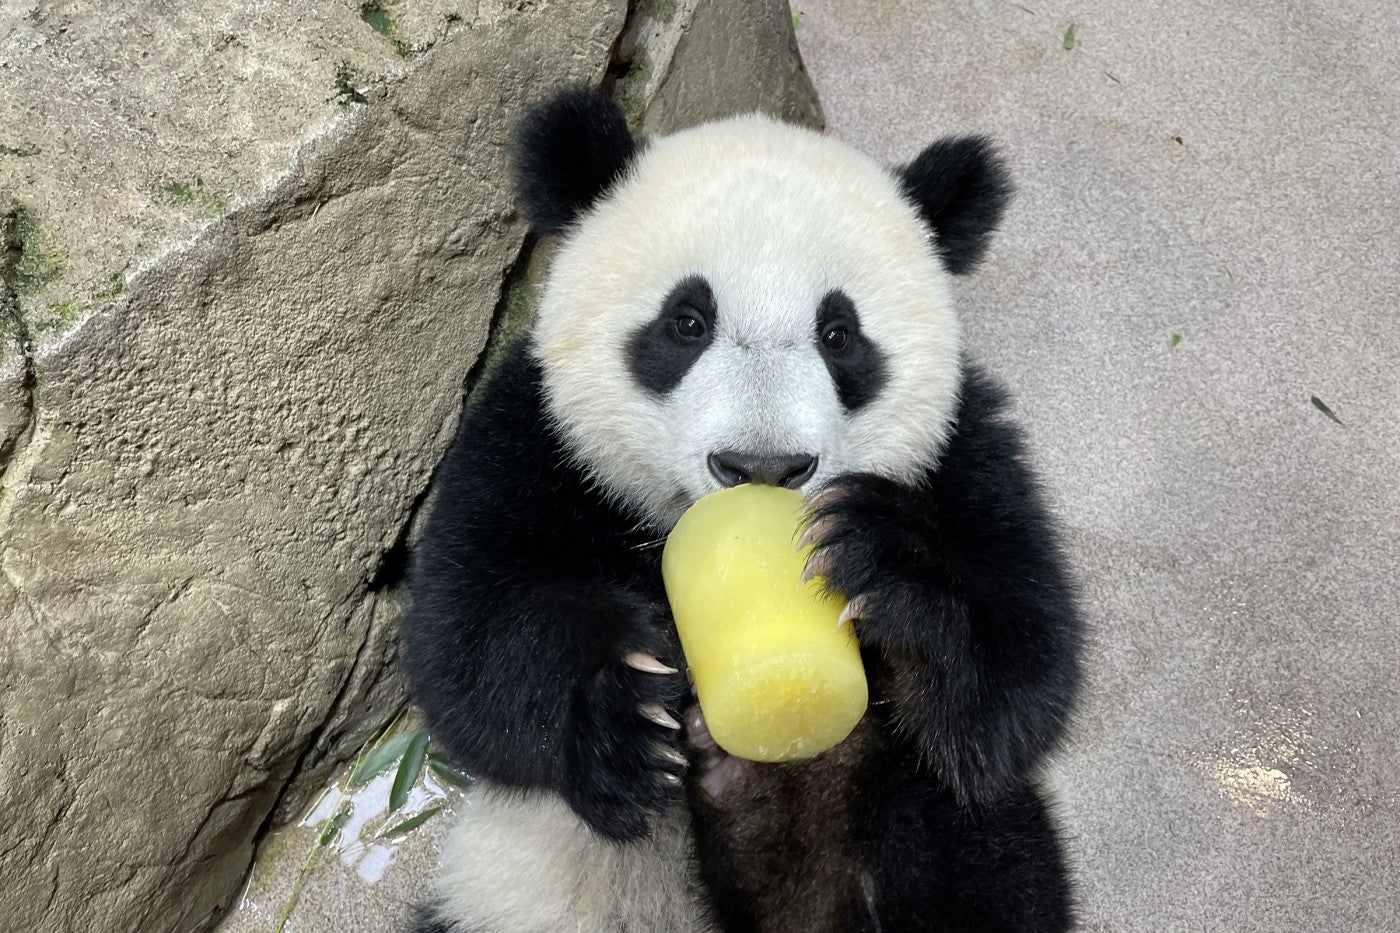 Giant panda cub Xiao Qi Ji lays on his back and eats an apple juice fruitsicle in his indoor enclosure. 